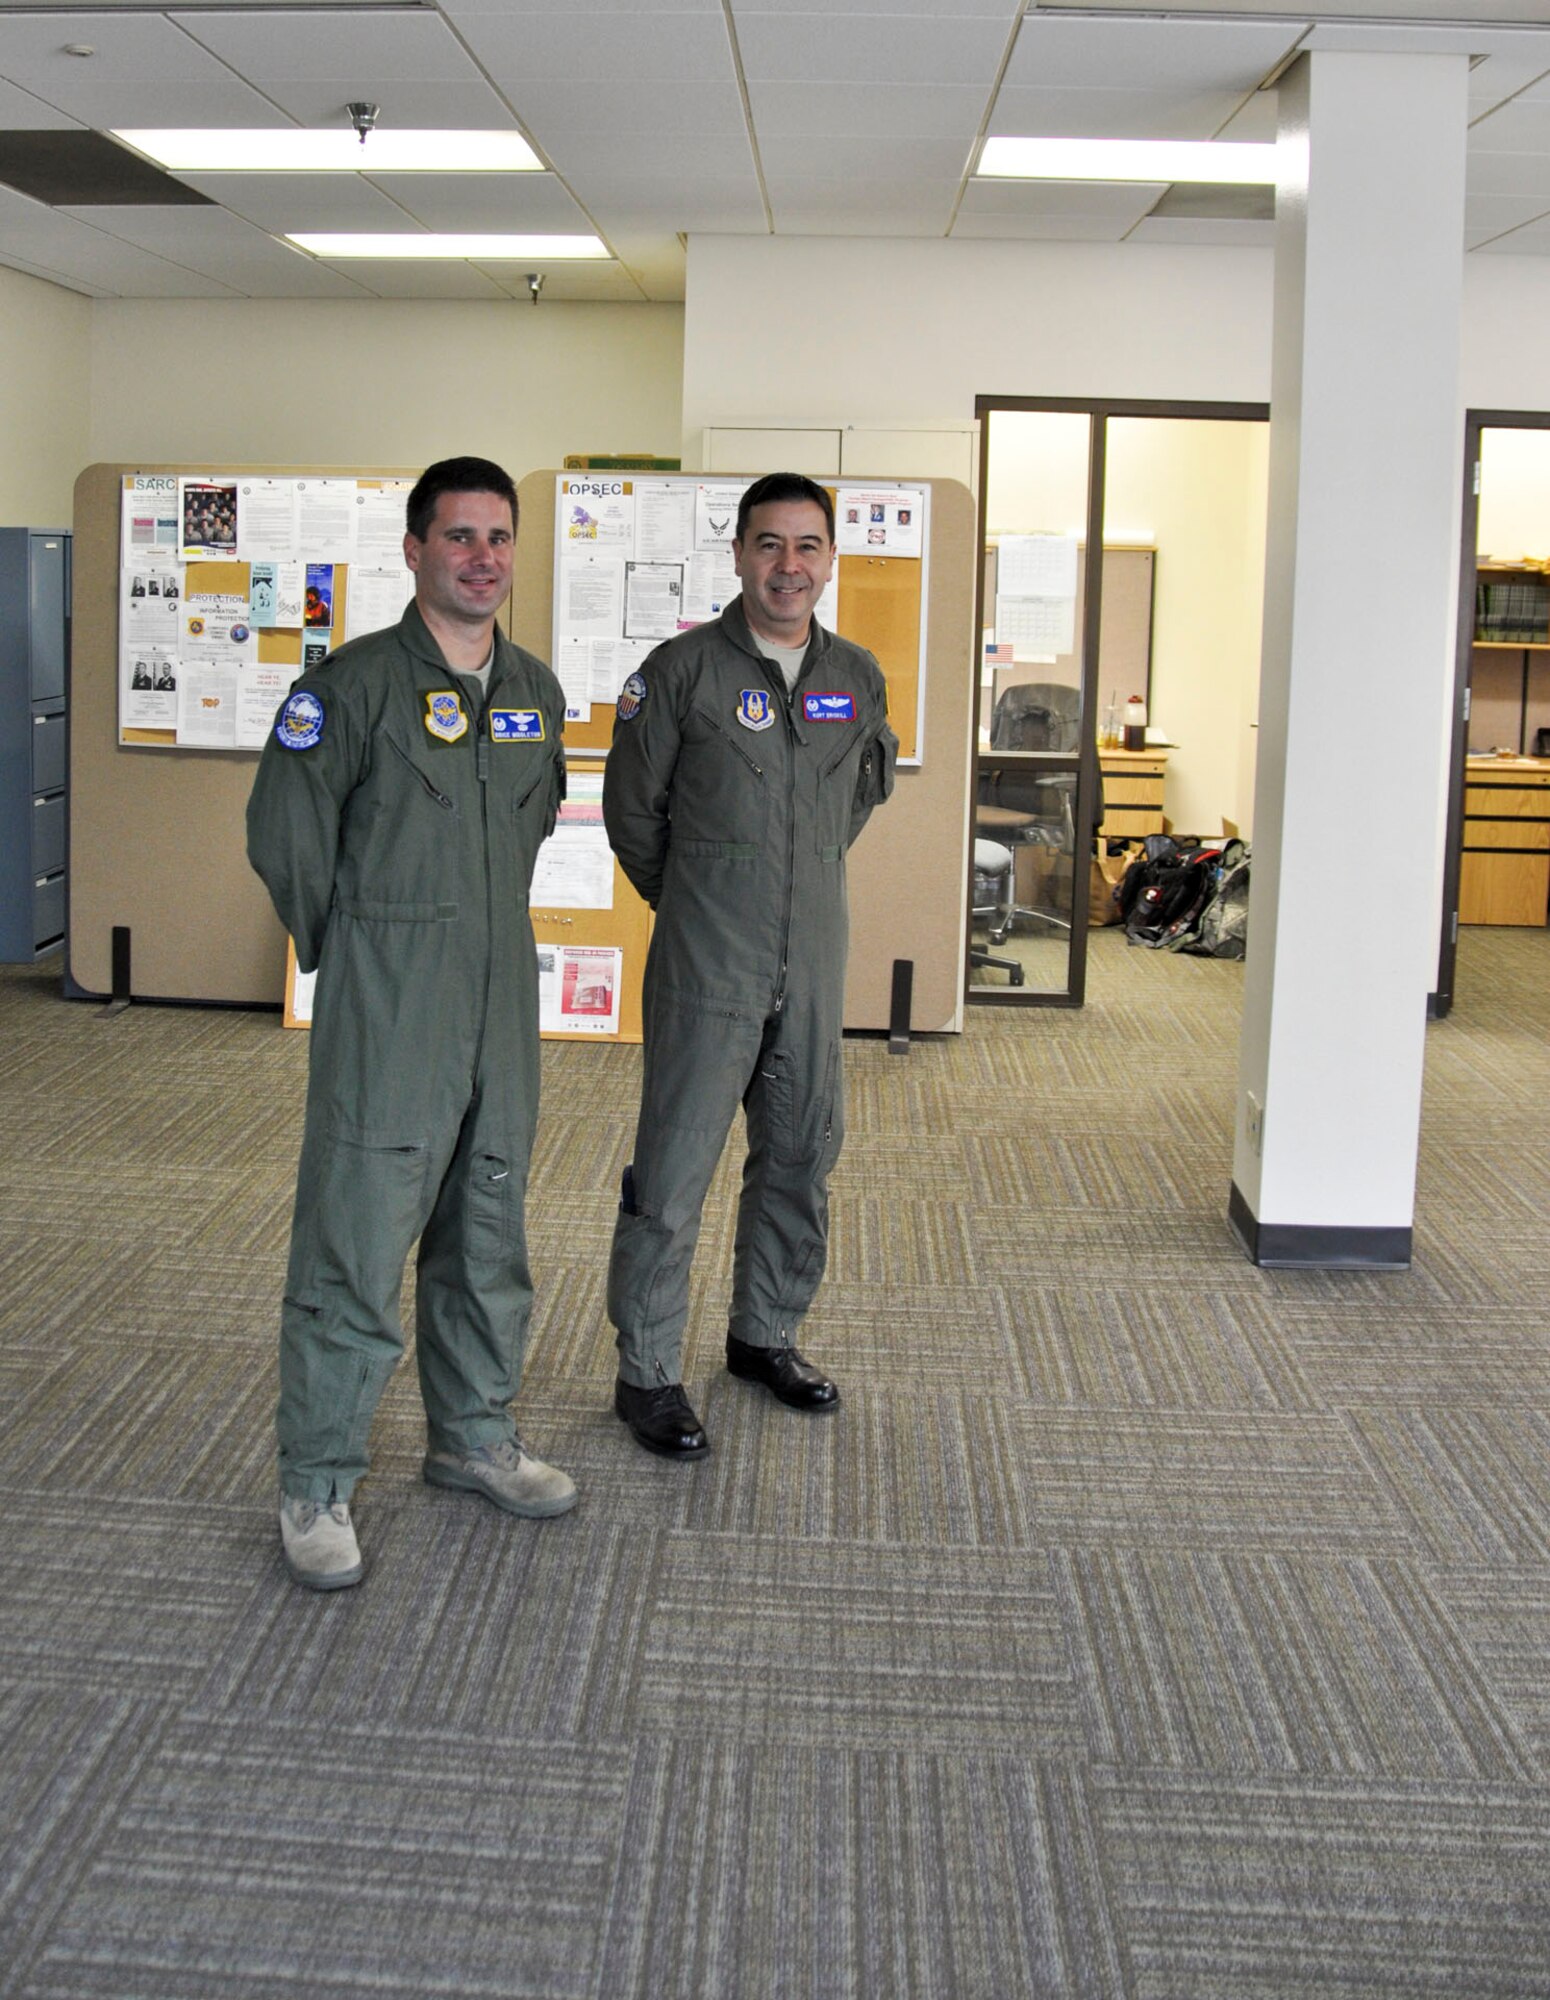 912th Air Refueling Squadron Commander Lt. Col. Brice Middleton (left) stands with 336th Air Refueling Squadron Commander Lt. Col. Kurt Driskill in the open space that will eventually house desks for members of the 912 ARS.  The 912 ARS stood up Oct. 1, 2010 as an active duty associate unit with the 336 ARS at March Air Reserve Base, Calif. 